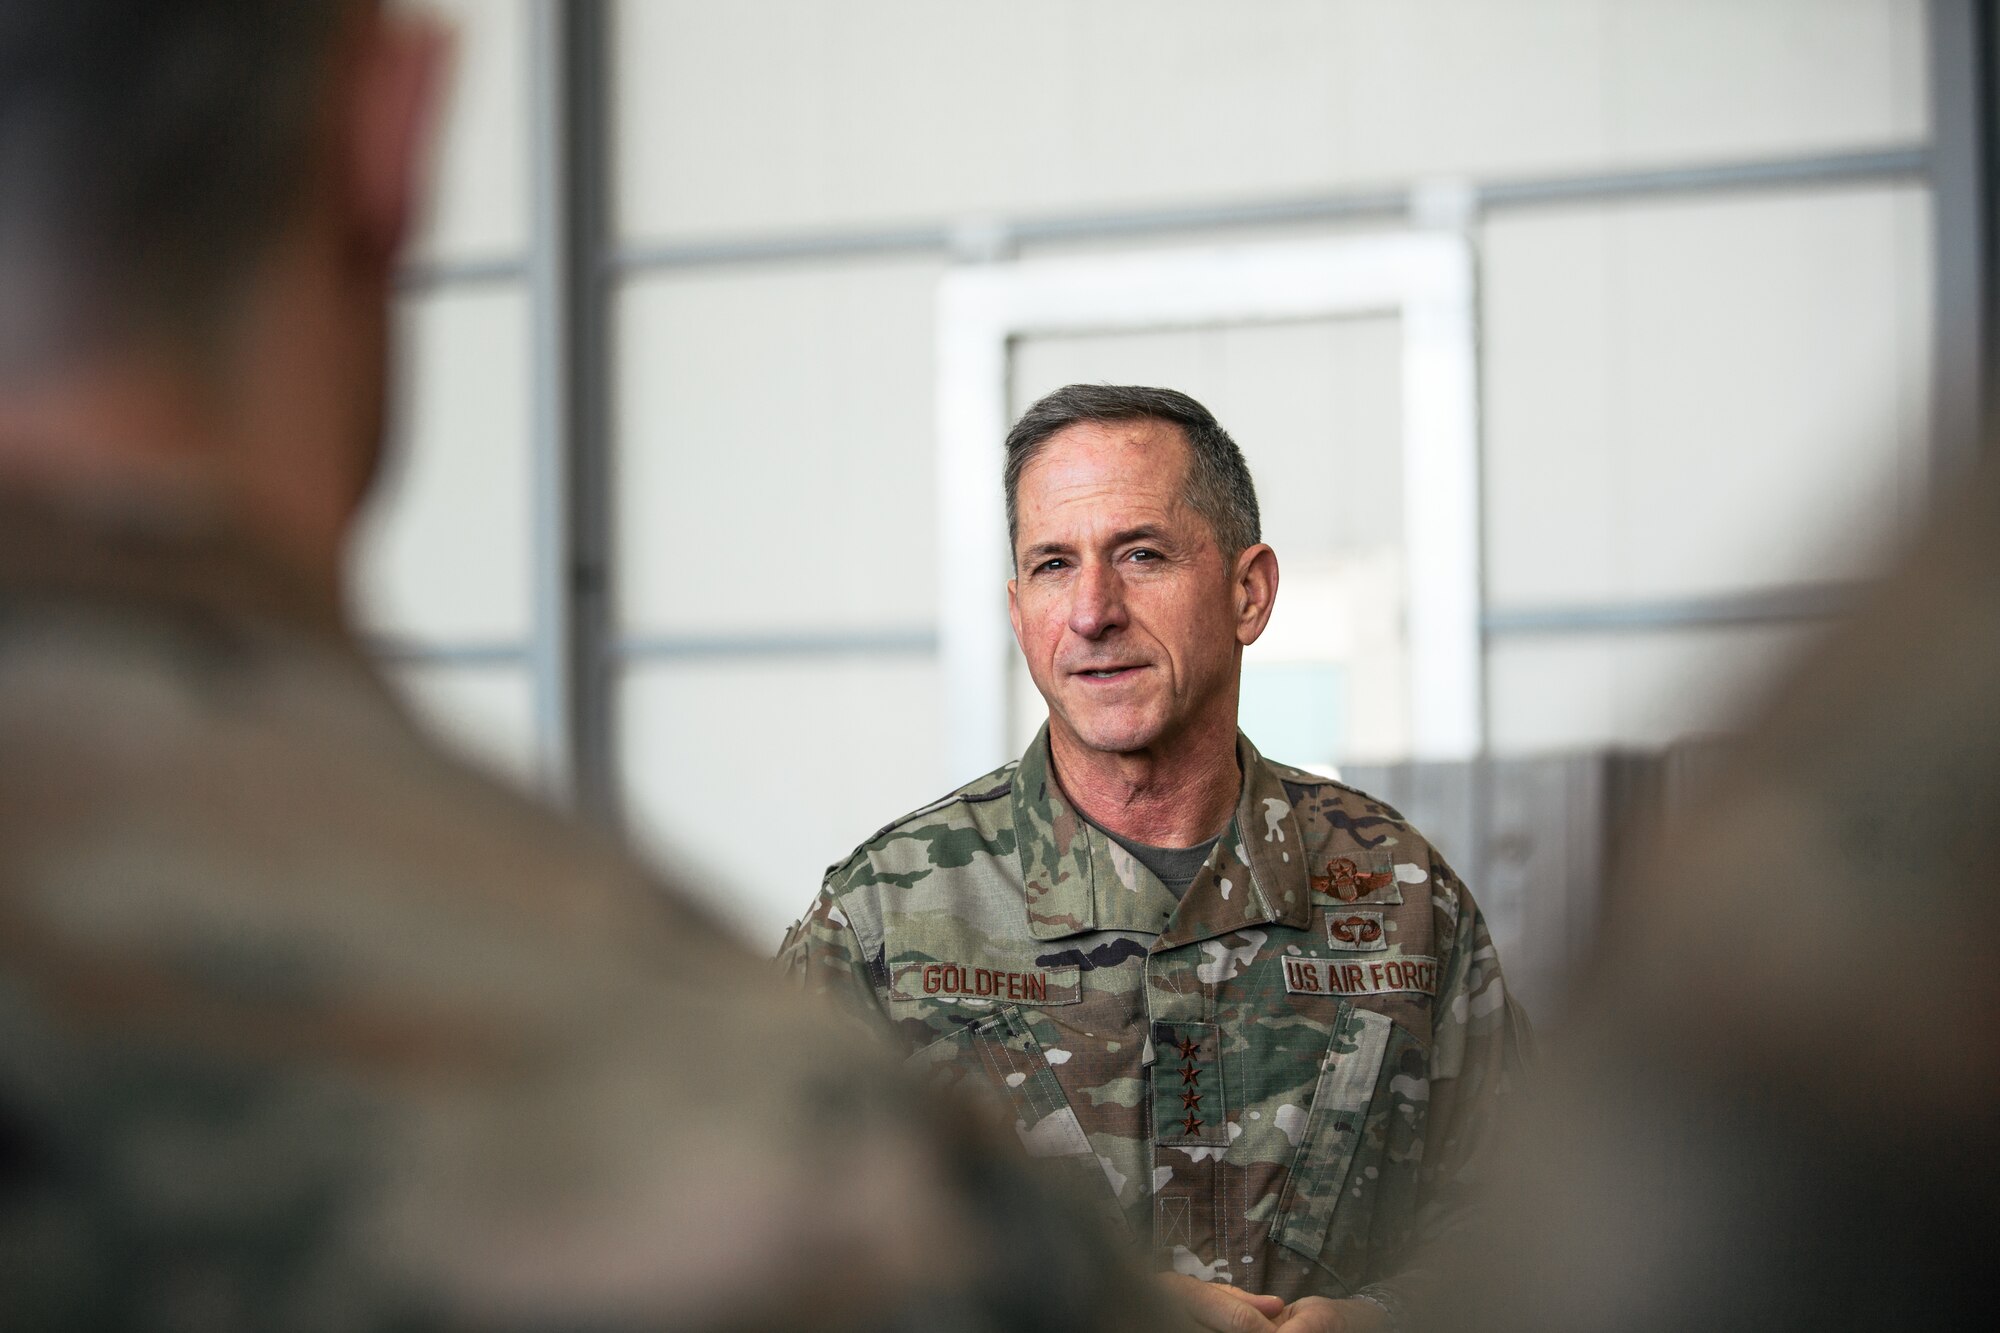 Air Force Chief of Staff Gen. David L. Goldfein thanks deployed Airmen for their service at an undisclosed location in Southwest Asia, Dec. 22, 2018. Goldfein, Chief Master Sgt. of the Air Force Kaleth O. Wright, and U.S. Air Forces Central Command commander Lt. Gen. Joseph Guastella traveled throughout U.S. Central Command's area of responsibility thanking Airmen for their sacrifice, recognizing outstanding performers and listening to Airmen during the holiday season. (U.S. Air Force photo by Staff Sgt. Jordan Castelan)